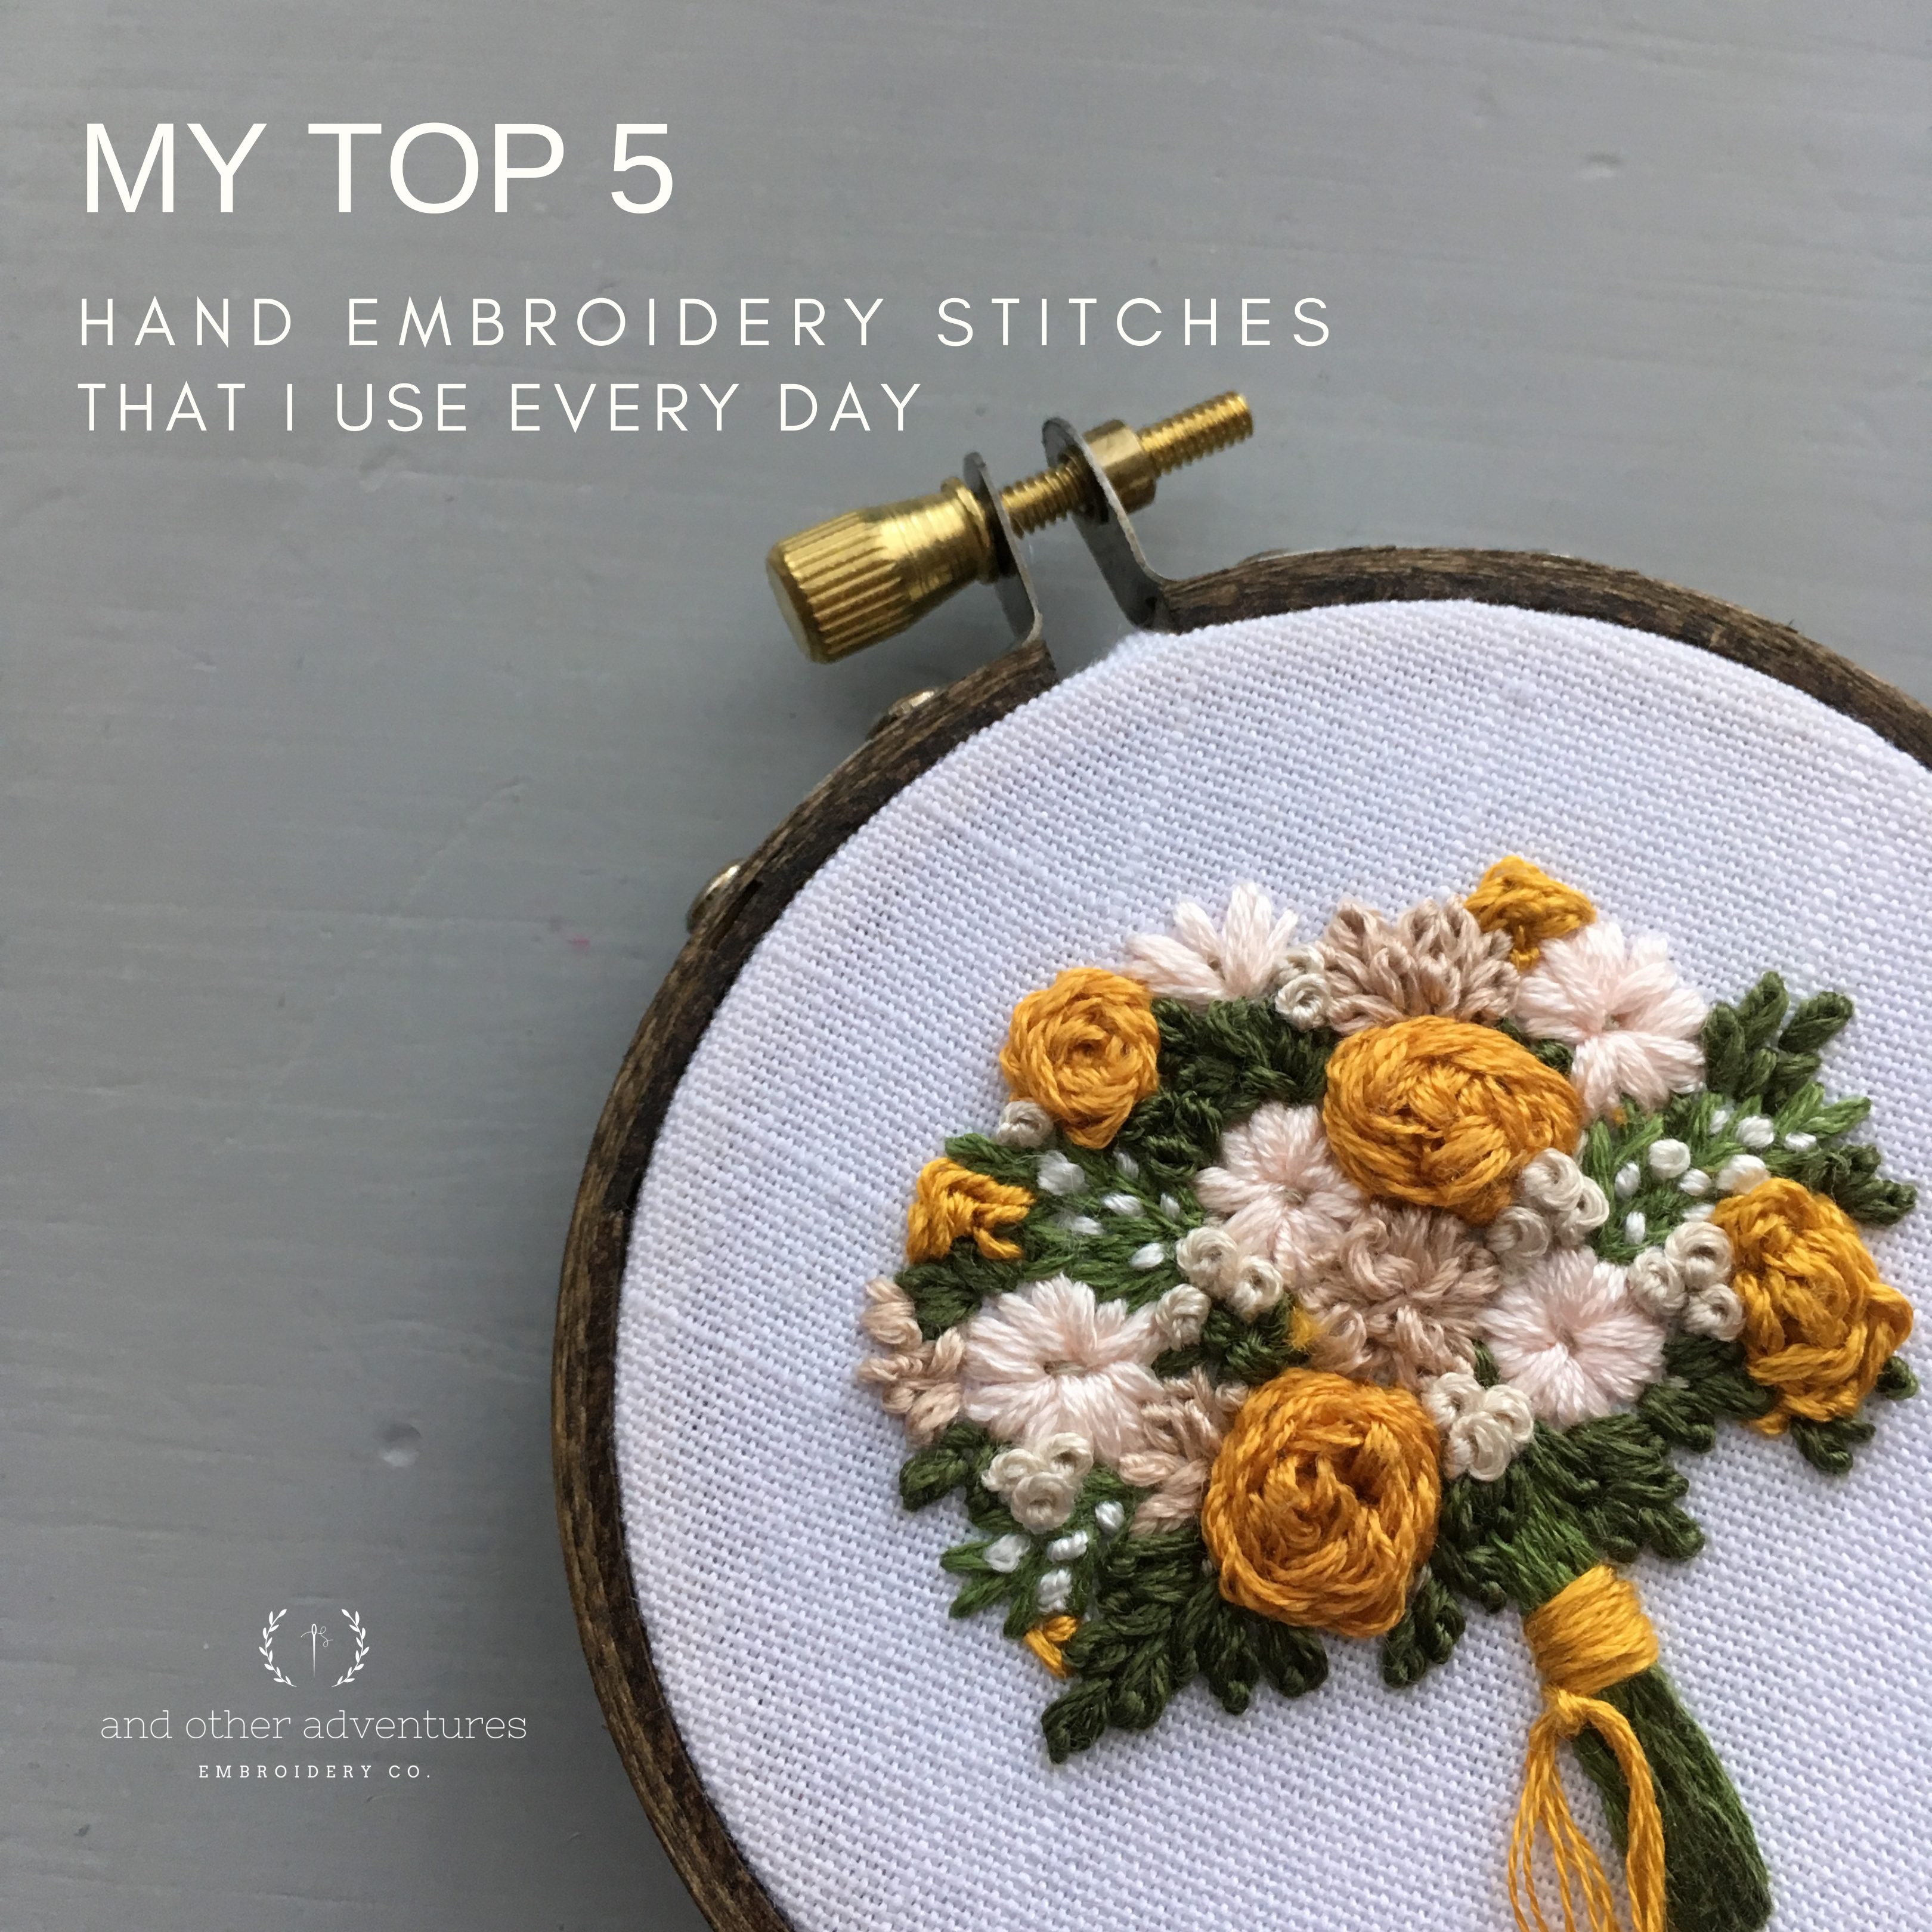 How To Decide What To Stitch On Your Embroidery Journal